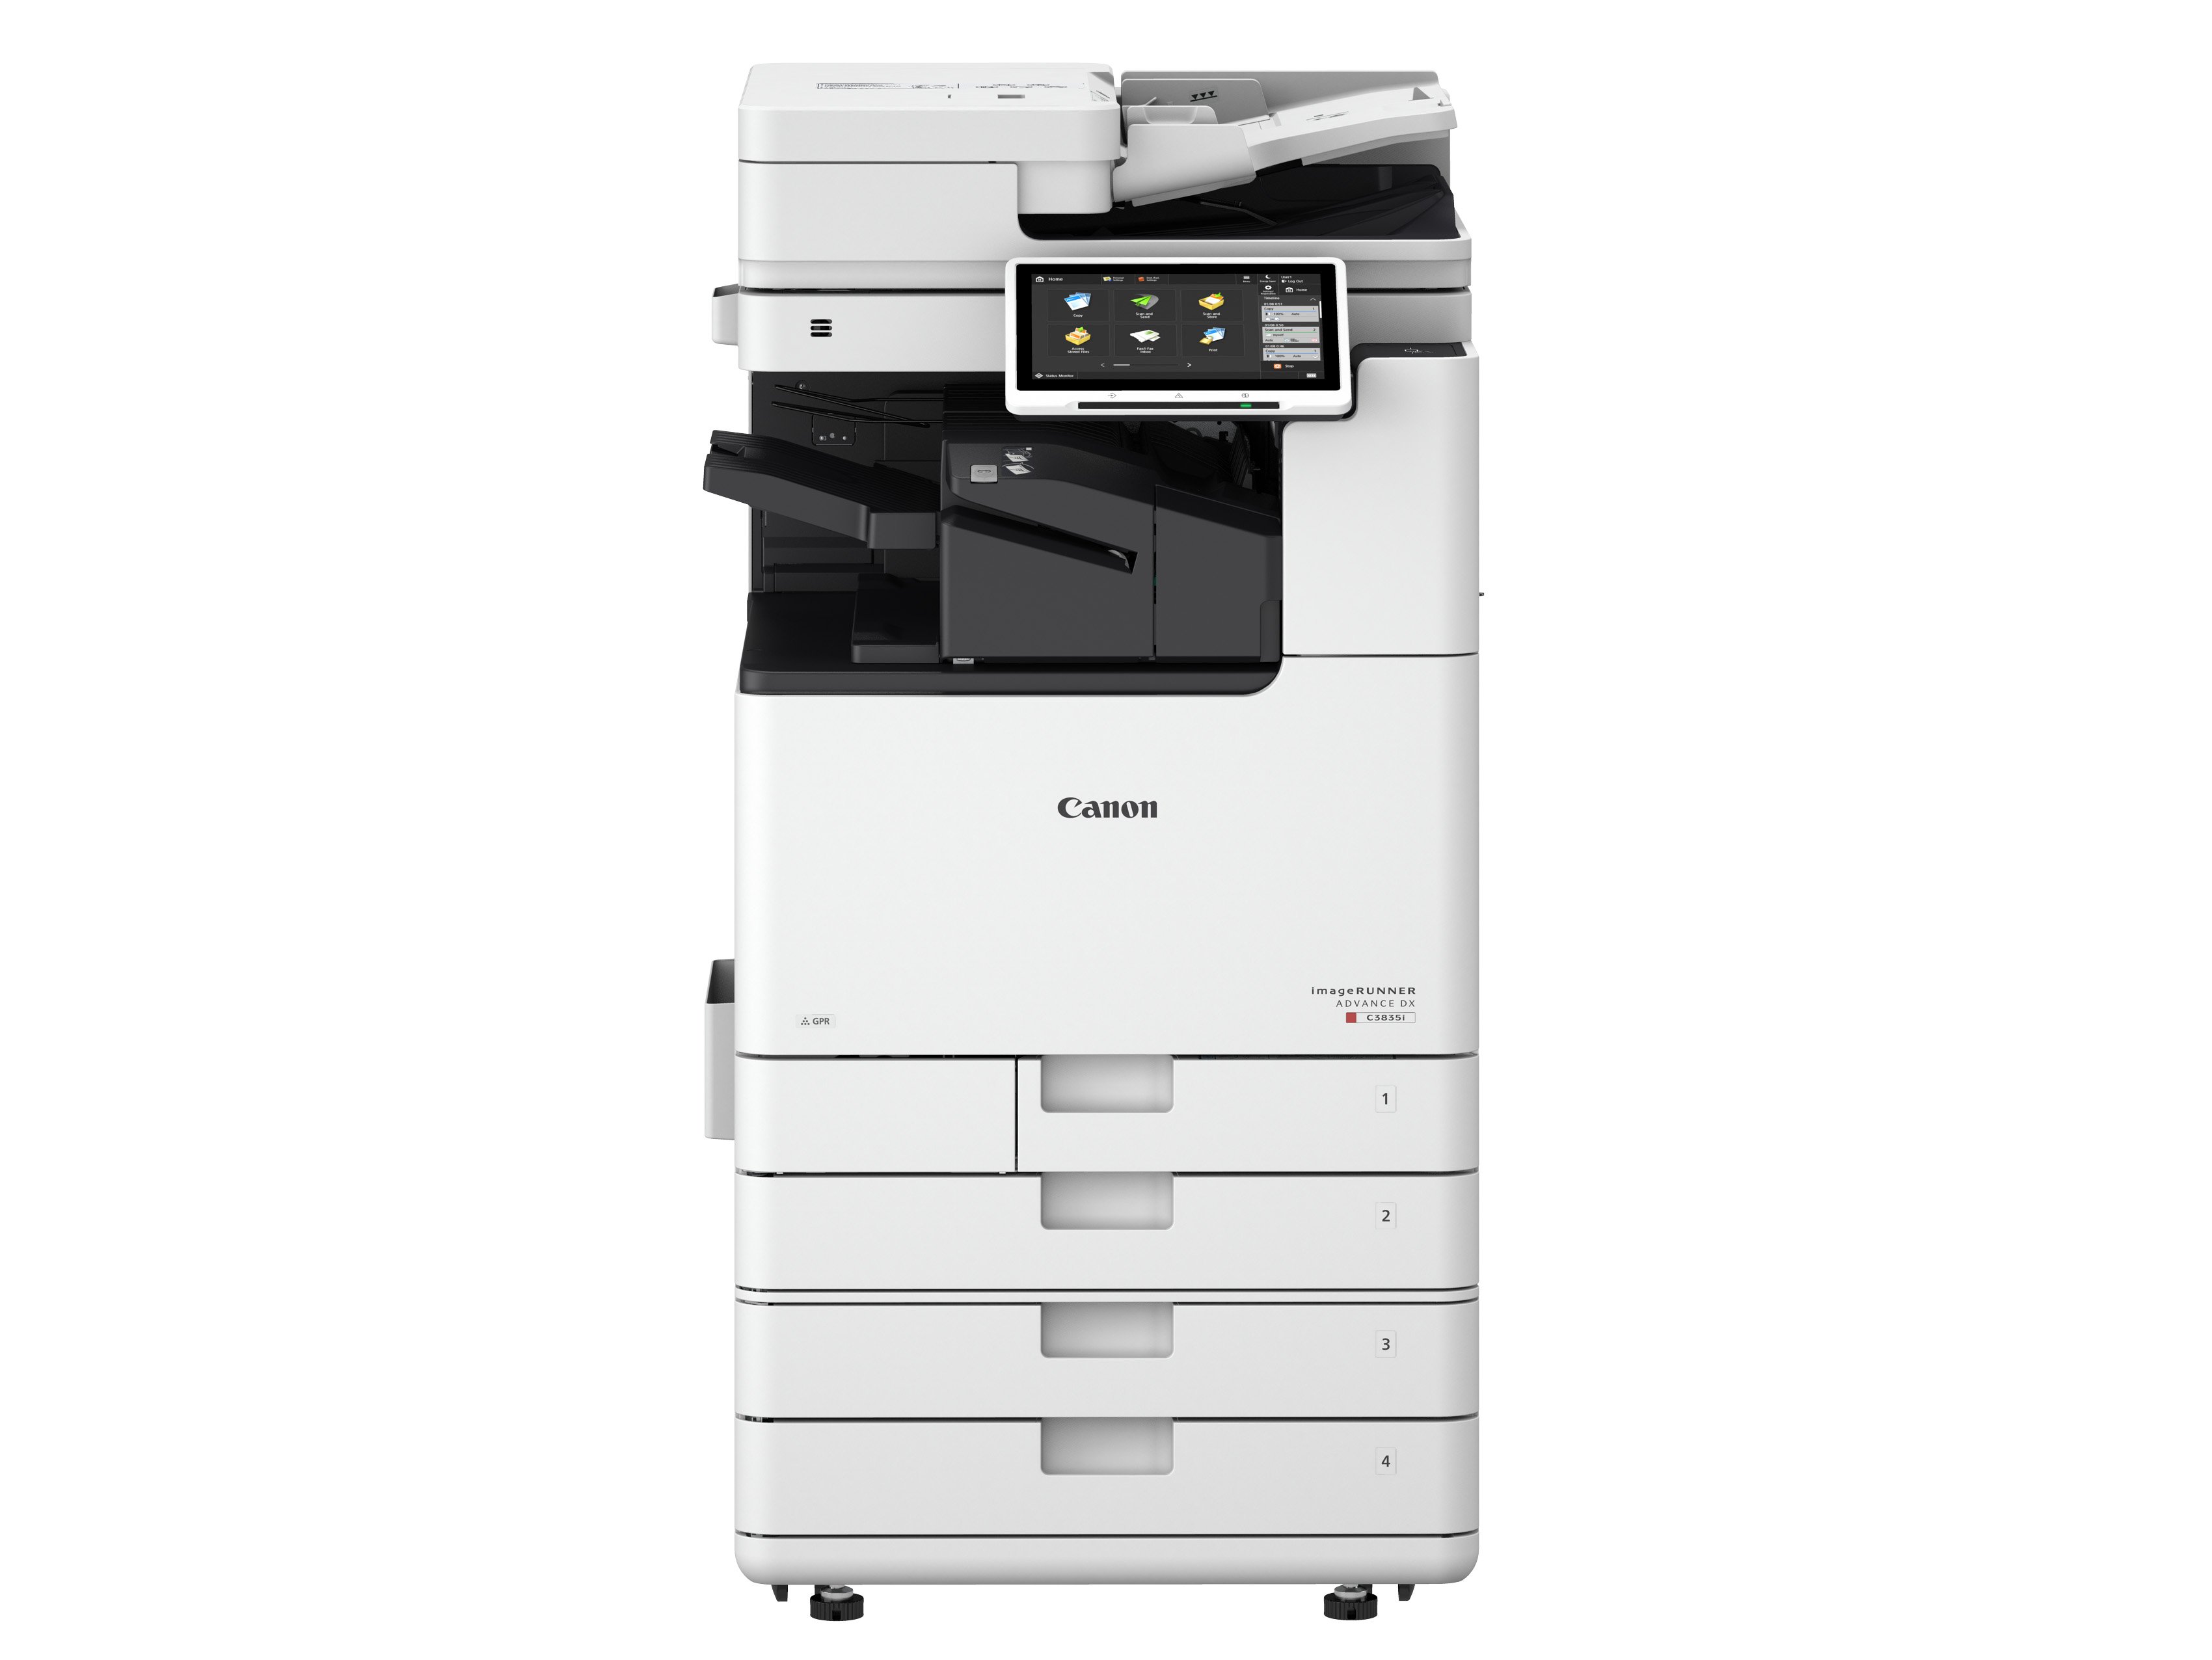 imageRUNNER ADVANCE DX 4700 with inside finisher